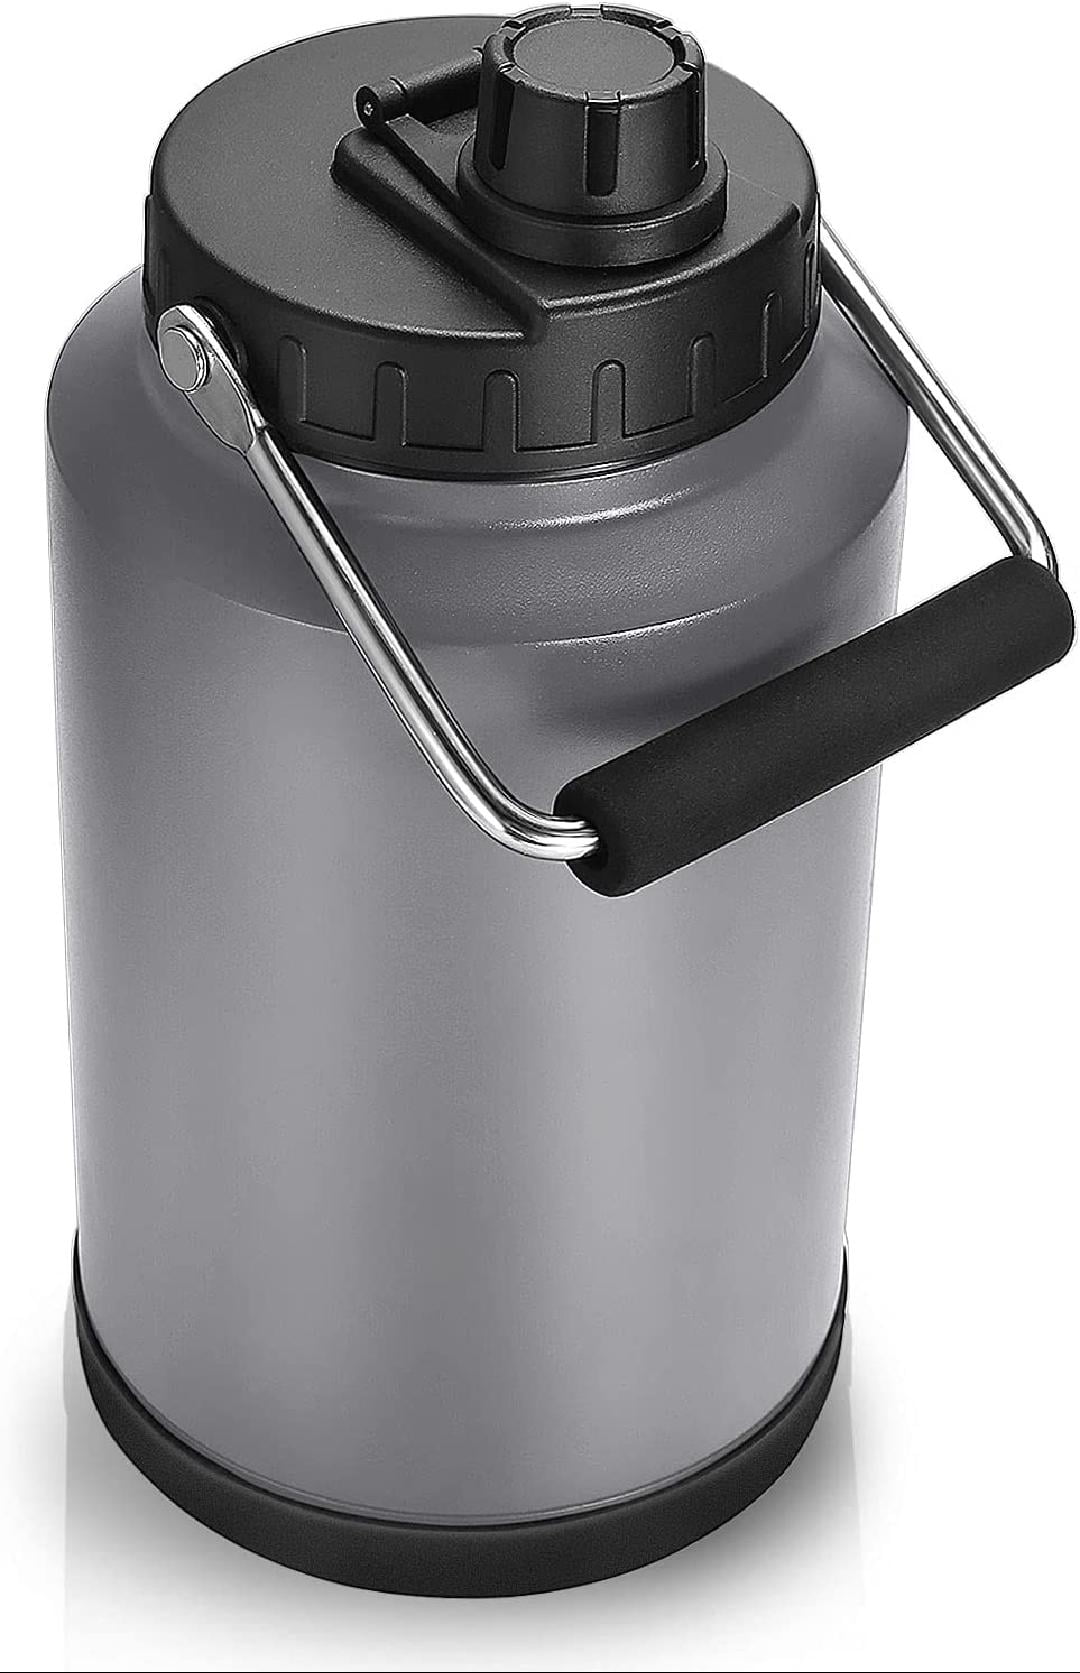 TAHOE TRAILS 1 Gallon Vacuum Insulated Water Bottle,1 Gallon Stainless  Steel Double Walled Water Jug,18/8 Food-Grade Stainless Steel Insulated  Water